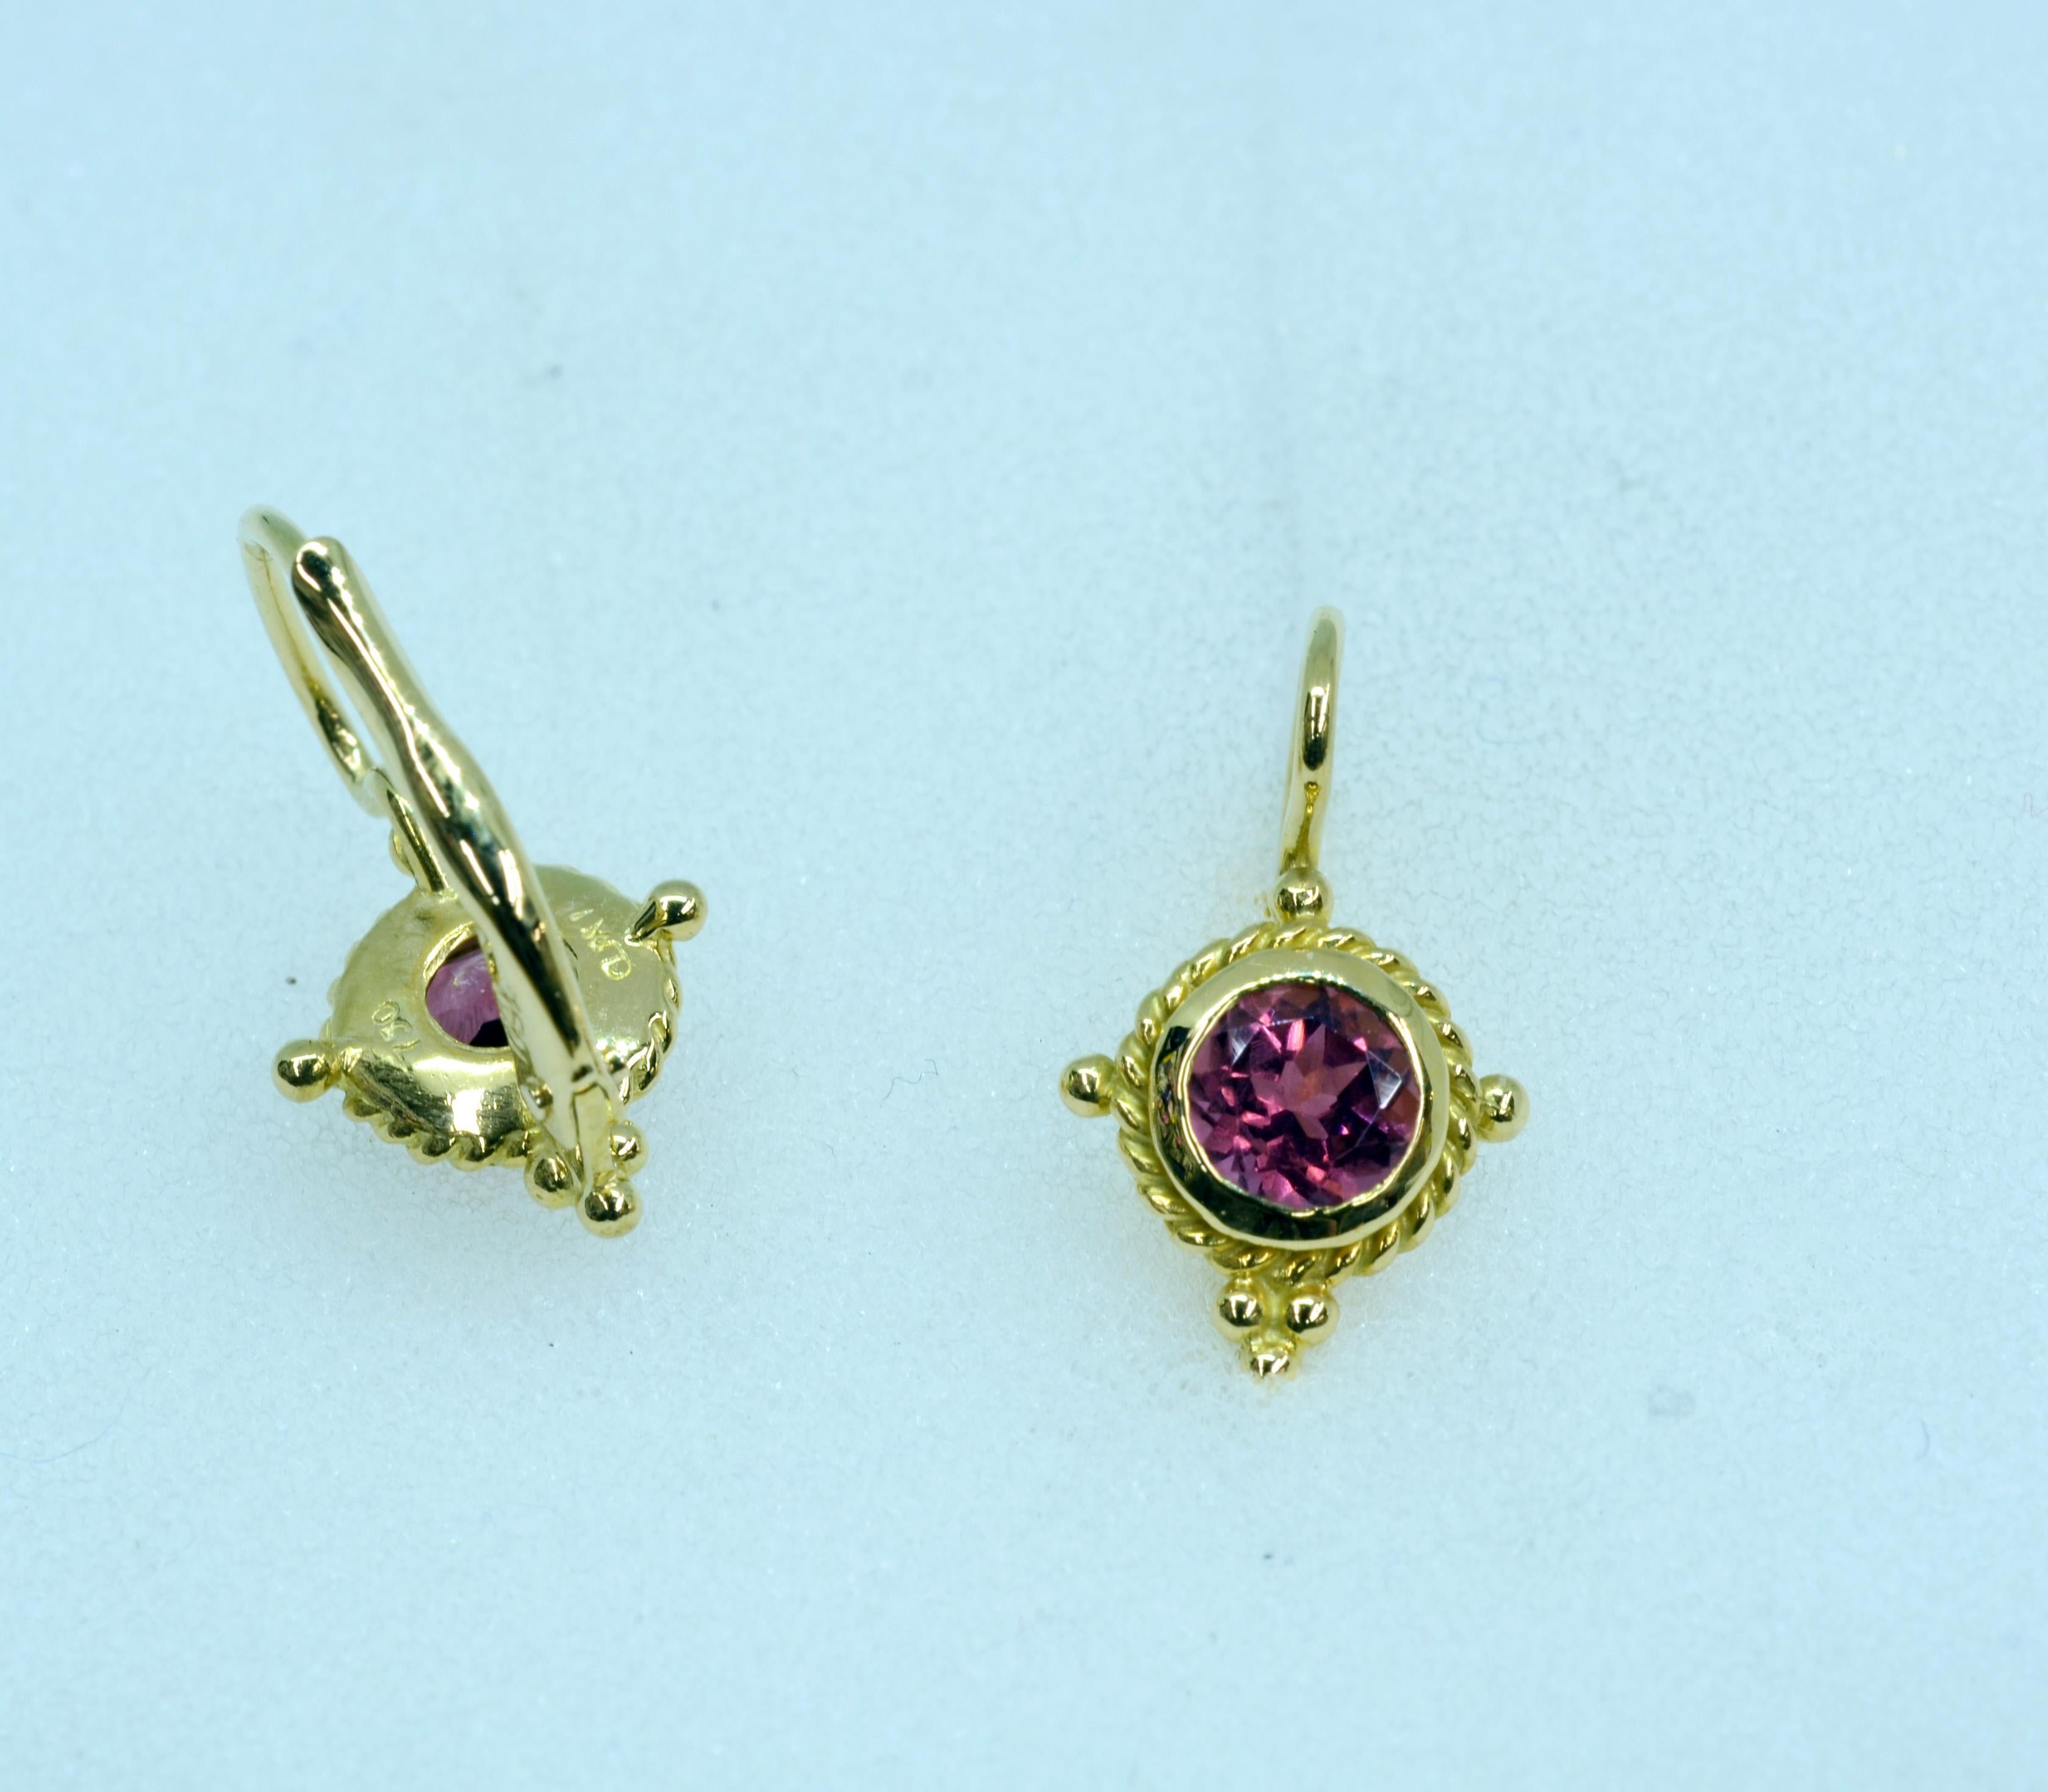 Very sweet pair of 18 Karat Yellow gold drop lever-back earrings. These are set with a pair of 5mm. round faceted pink tourmalines. They are accented with tiny gold beads. They are 8mm. in circumference.